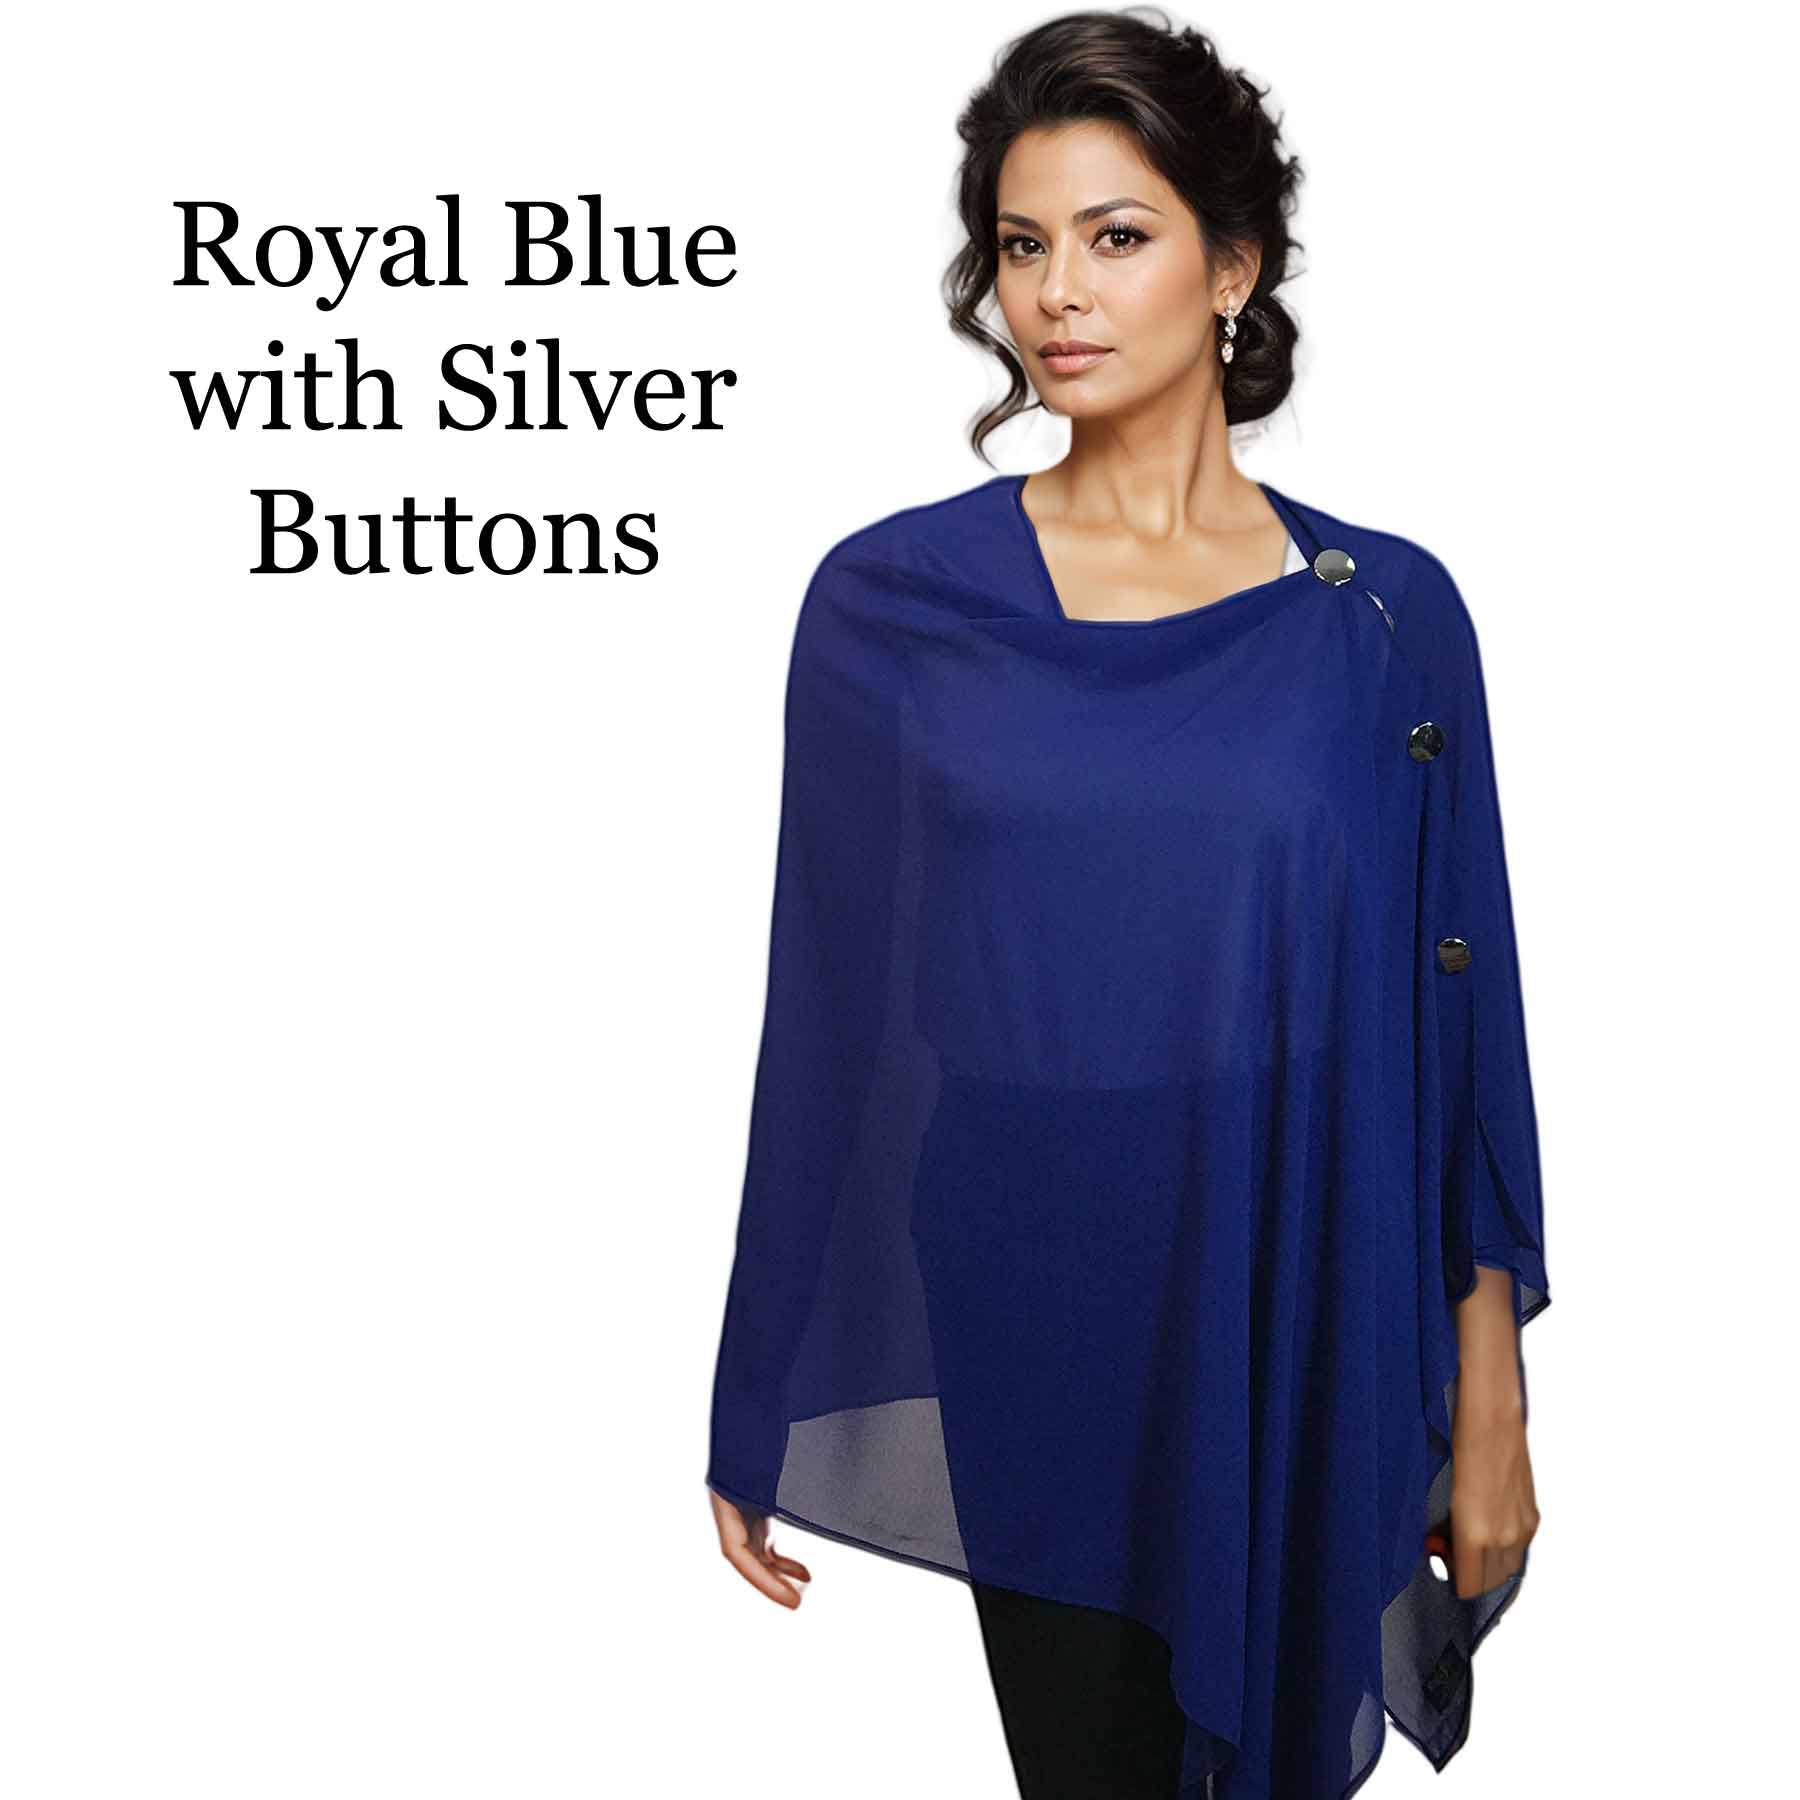 024S - Royal Blue w/Silver Buttons<br>
Georgette Button Shawl

